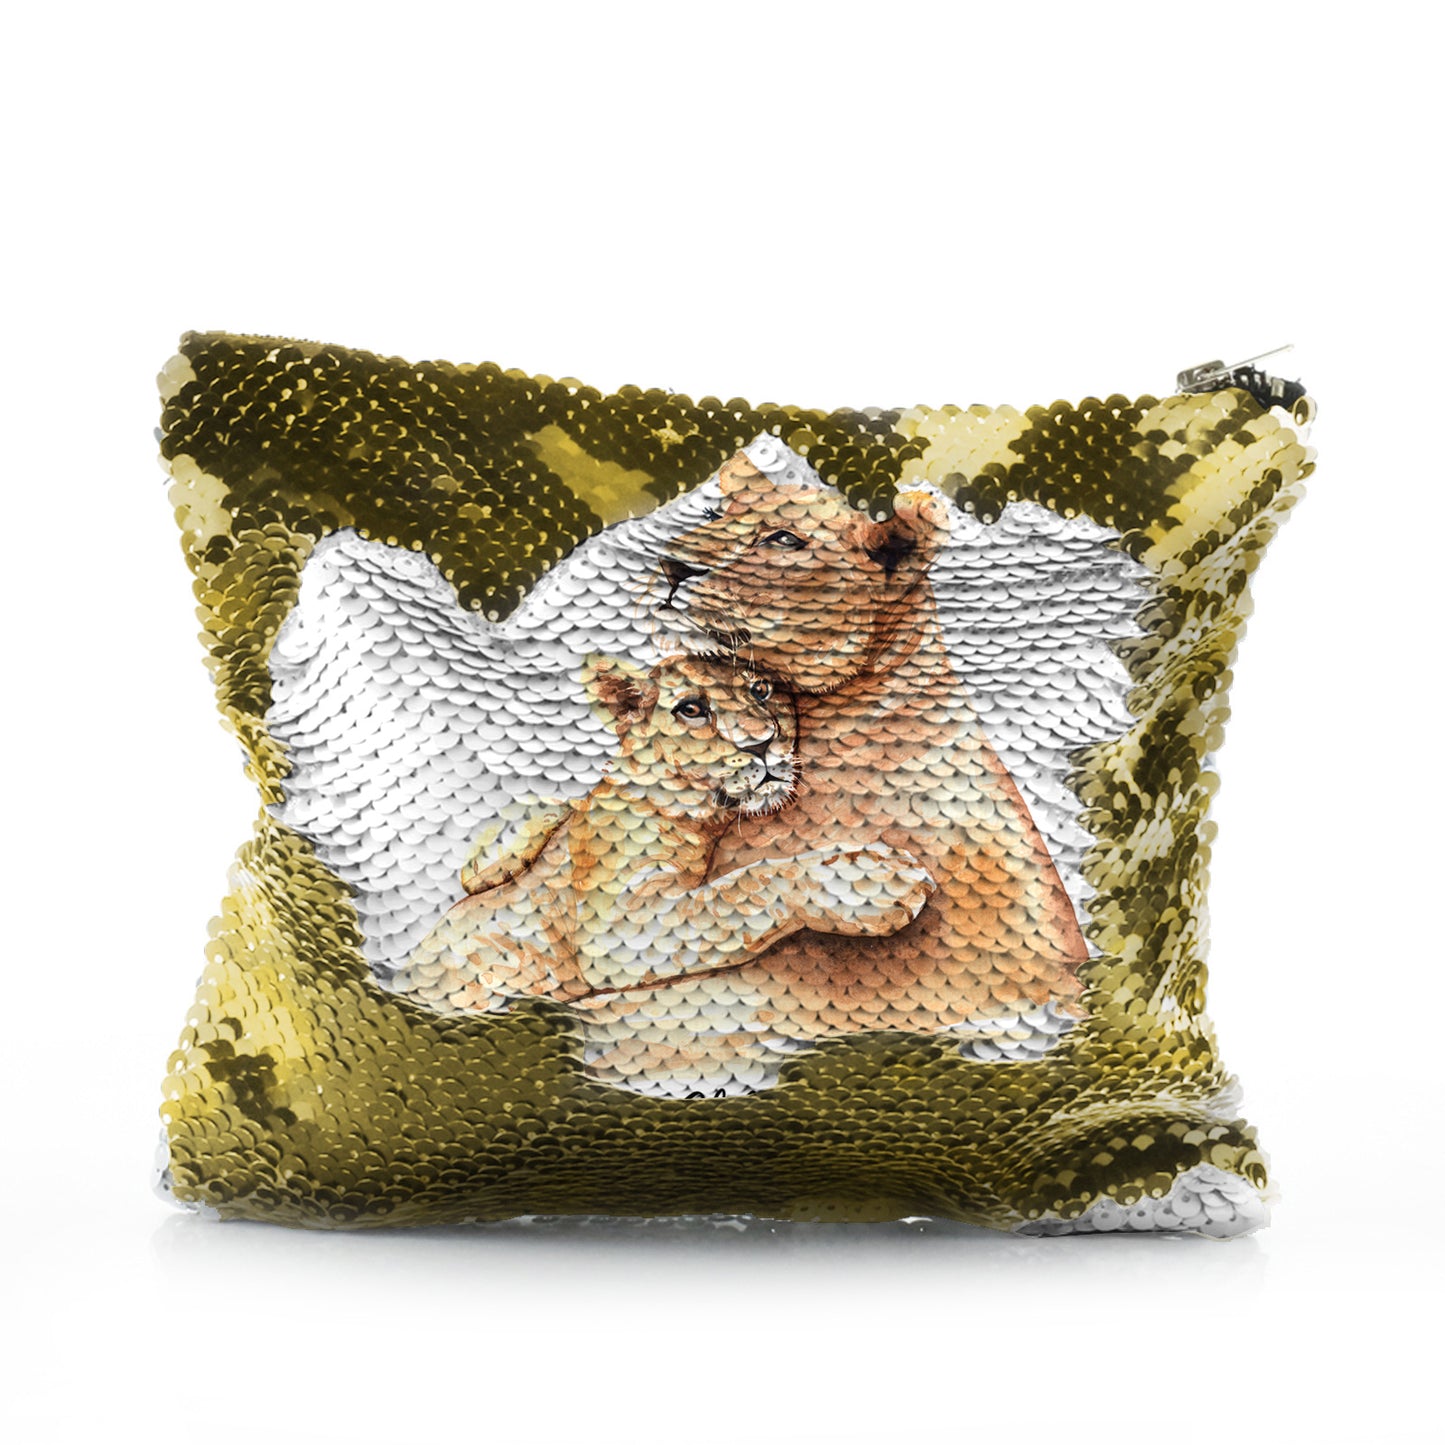 Personalised Sequin Zip Bag with Welcoming Text and Embracing Mum and Baby Lions